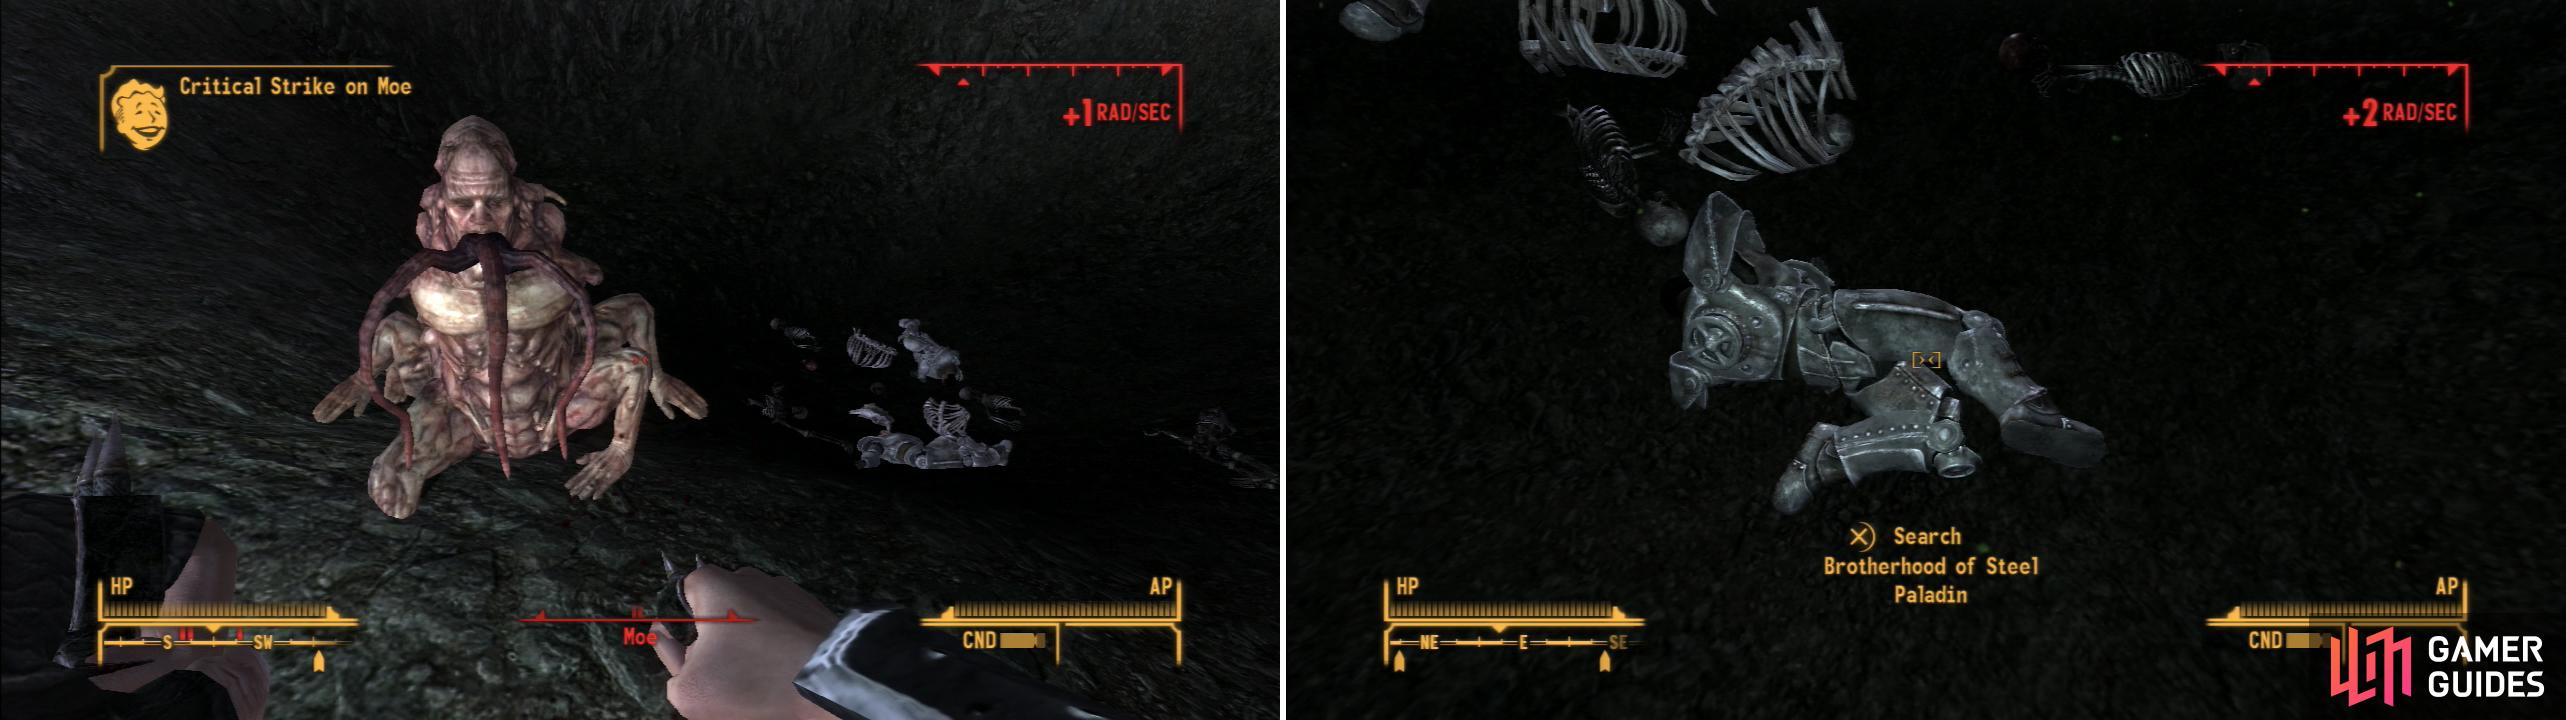 In a crater between Hidden Valley and Black Mountain, you can find the Centaur, Moe, and its pack (left). It seems that one of the Centaur’s victims includes one of the Brotherhood squads you’re looking for (right).